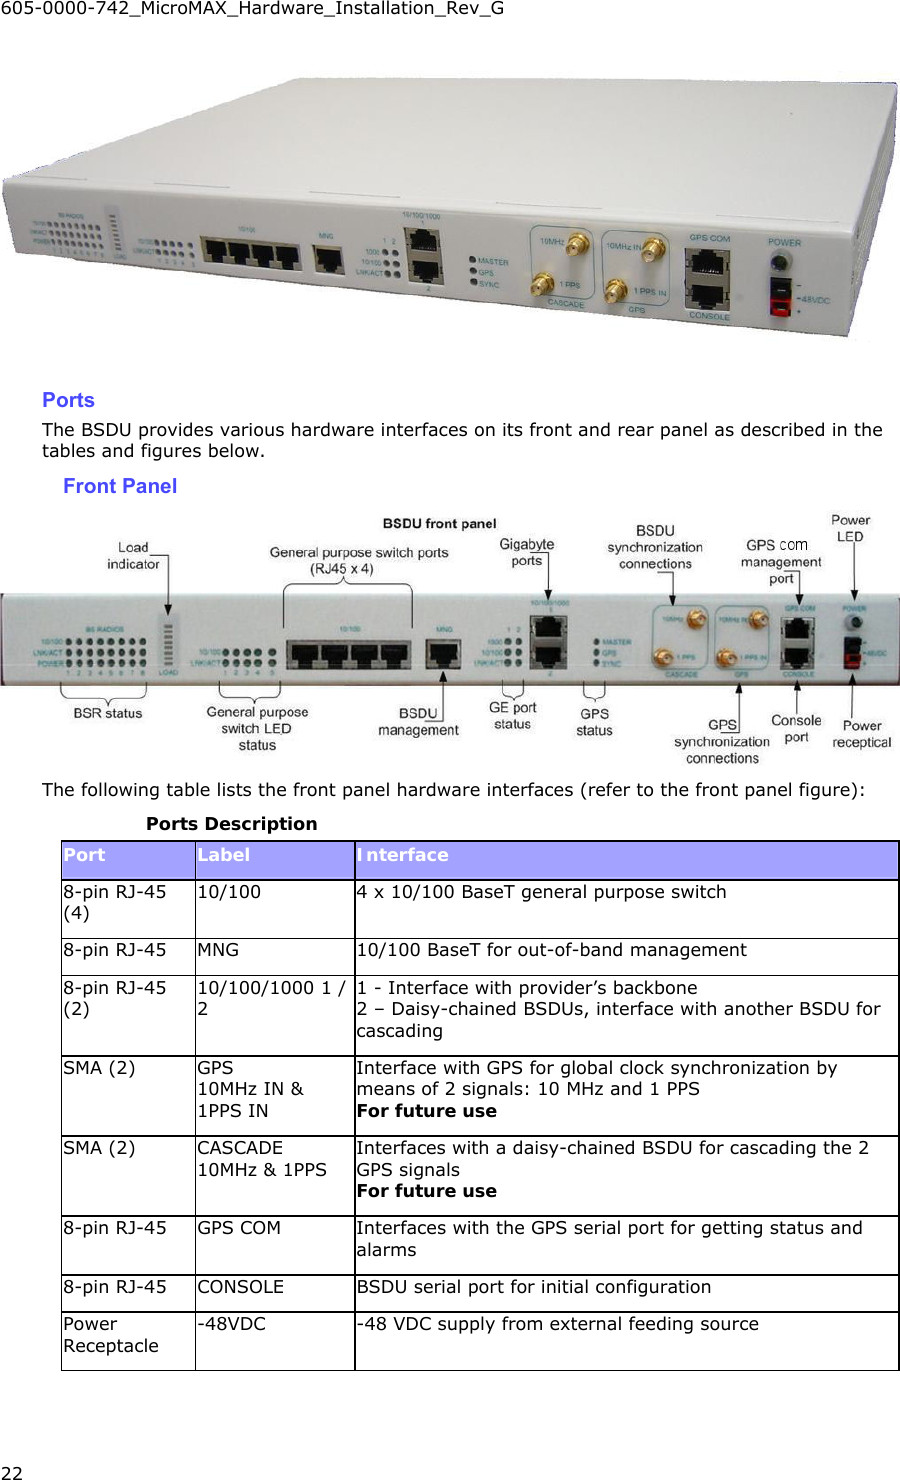 605-0000-742_MicroMAX_Hardware_Installation_Rev_G 22   Ports The BSDU provides various hardware interfaces on its front and rear panel as described in the tables and figures below. Front Panel  The following table lists the front panel hardware interfaces (refer to the front panel figure):   Ports Description Port  Label  Interface 8-pin RJ-45 (4) 10/100  4 x 10/100 BaseT general purpose switch 8-pin RJ-45  MNG  10/100 BaseT for out-of-band management 8-pin RJ-45 (2) 10/100/1000 1 / 2 1 - Interface with provider’s backbone  2 – Daisy-chained BSDUs, interface with another BSDU for cascading SMA (2)  GPS 10MHz IN &amp; 1PPS IN Interface with GPS for global clock synchronization by means of 2 signals: 10 MHz and 1 PPS For future use SMA (2)  CASCADE 10MHz &amp; 1PPS Interfaces with a daisy-chained BSDU for cascading the 2 GPS signals For future use 8-pin RJ-45  GPS COM  Interfaces with the GPS serial port for getting status and alarms 8-pin RJ-45  CONSOLE  BSDU serial port for initial configuration Power Receptacle -48VDC  -48 VDC supply from external feeding source  